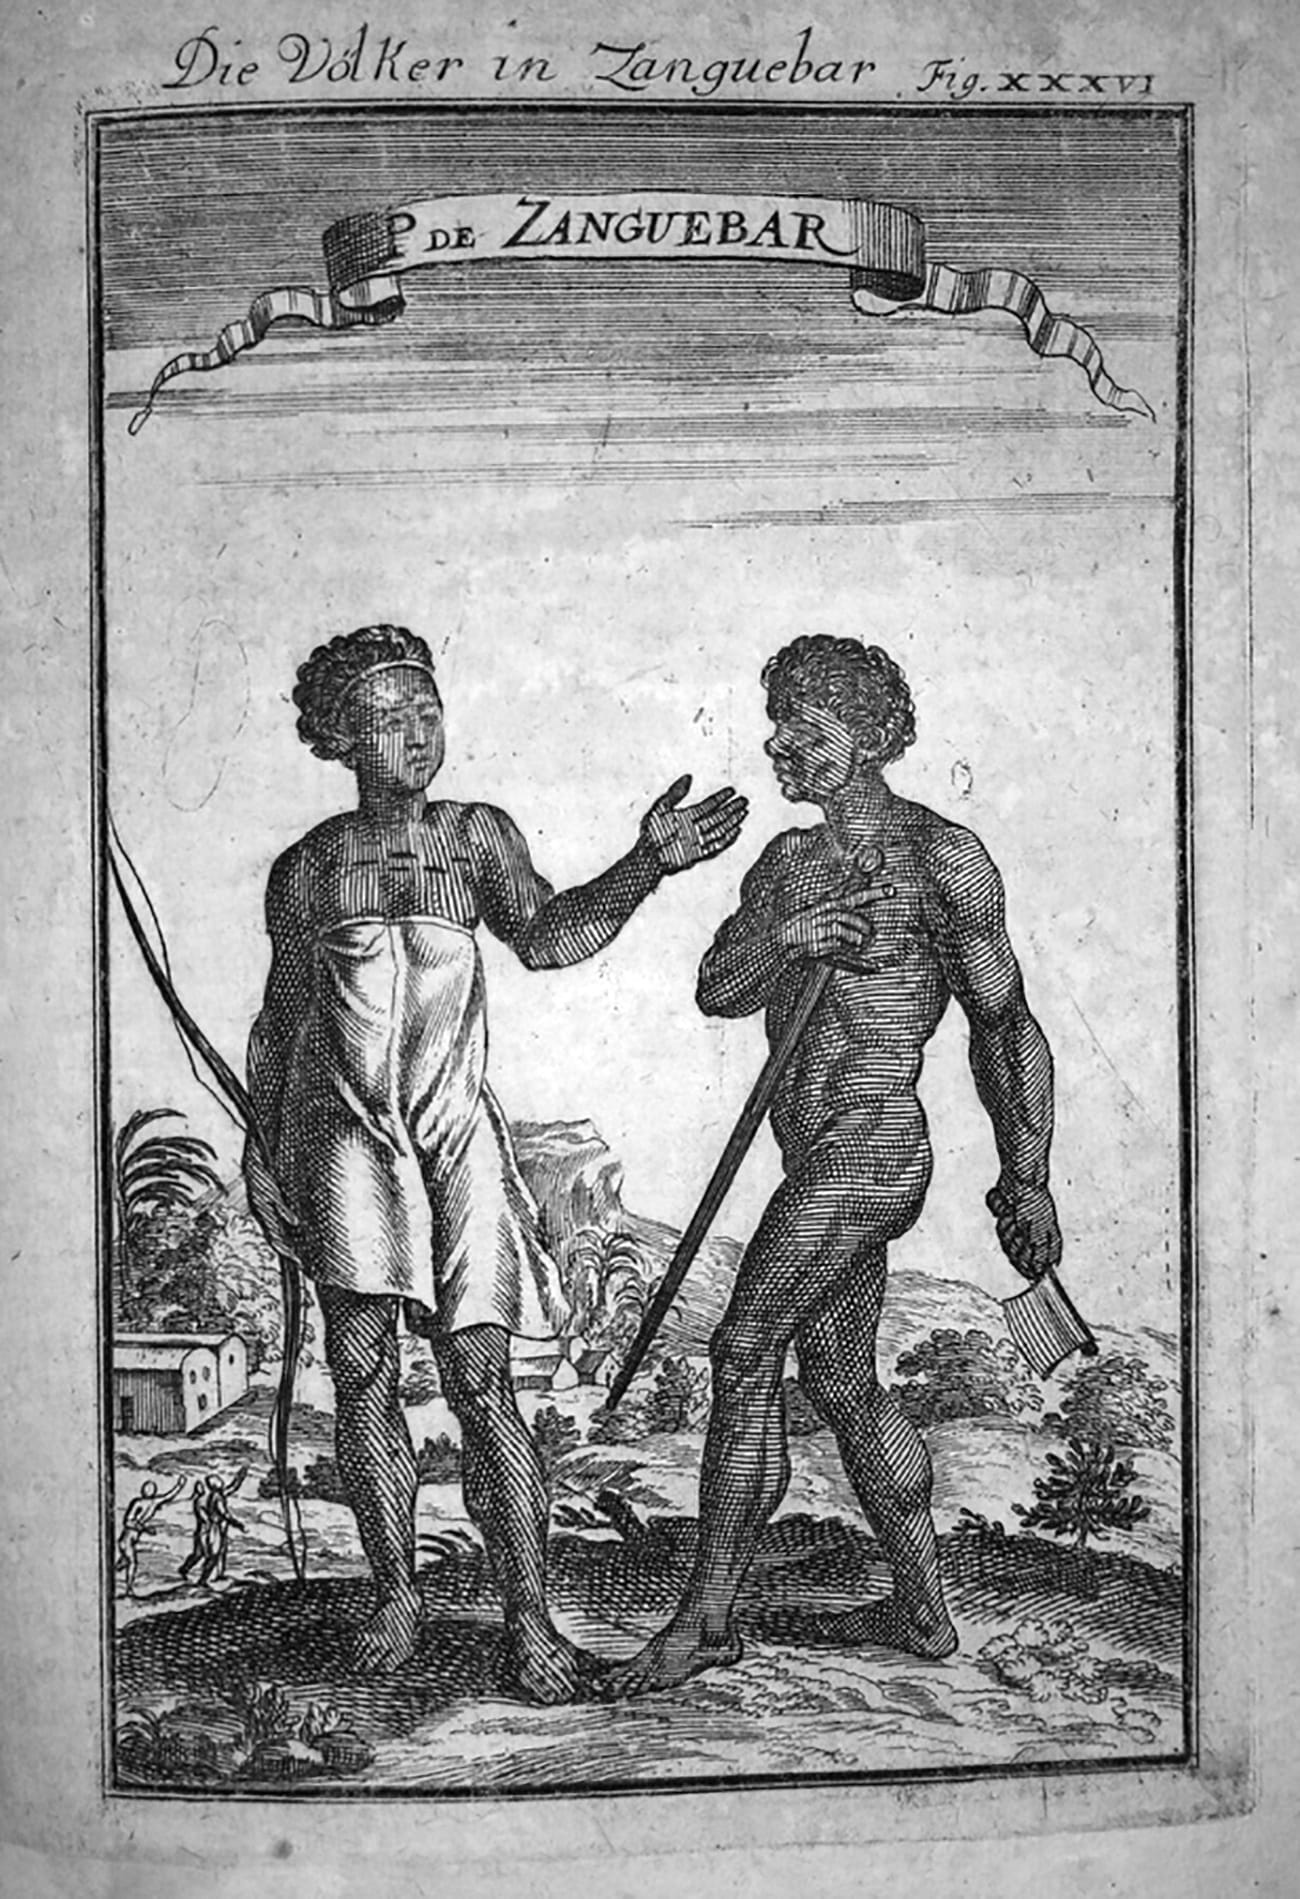 Zanzibarians depiction as per year 1685 - illustration by Alain Manesson Mallet